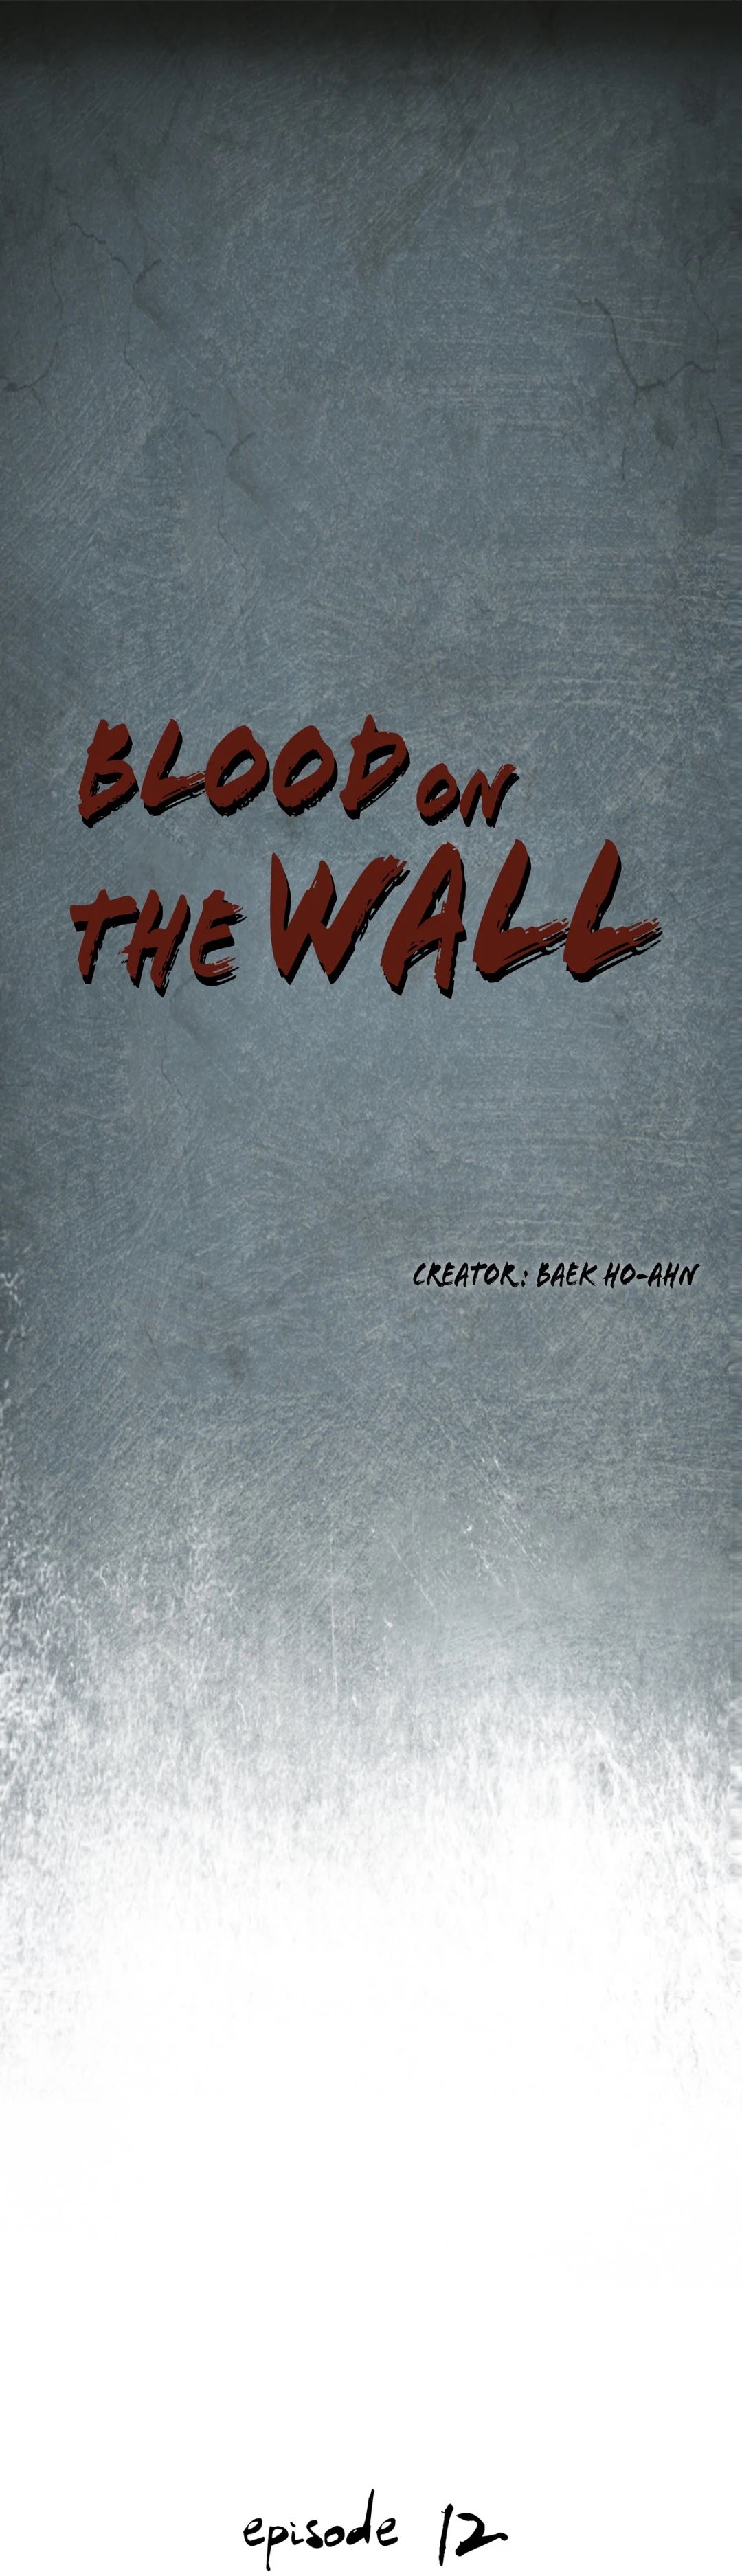 Blood on the wall image